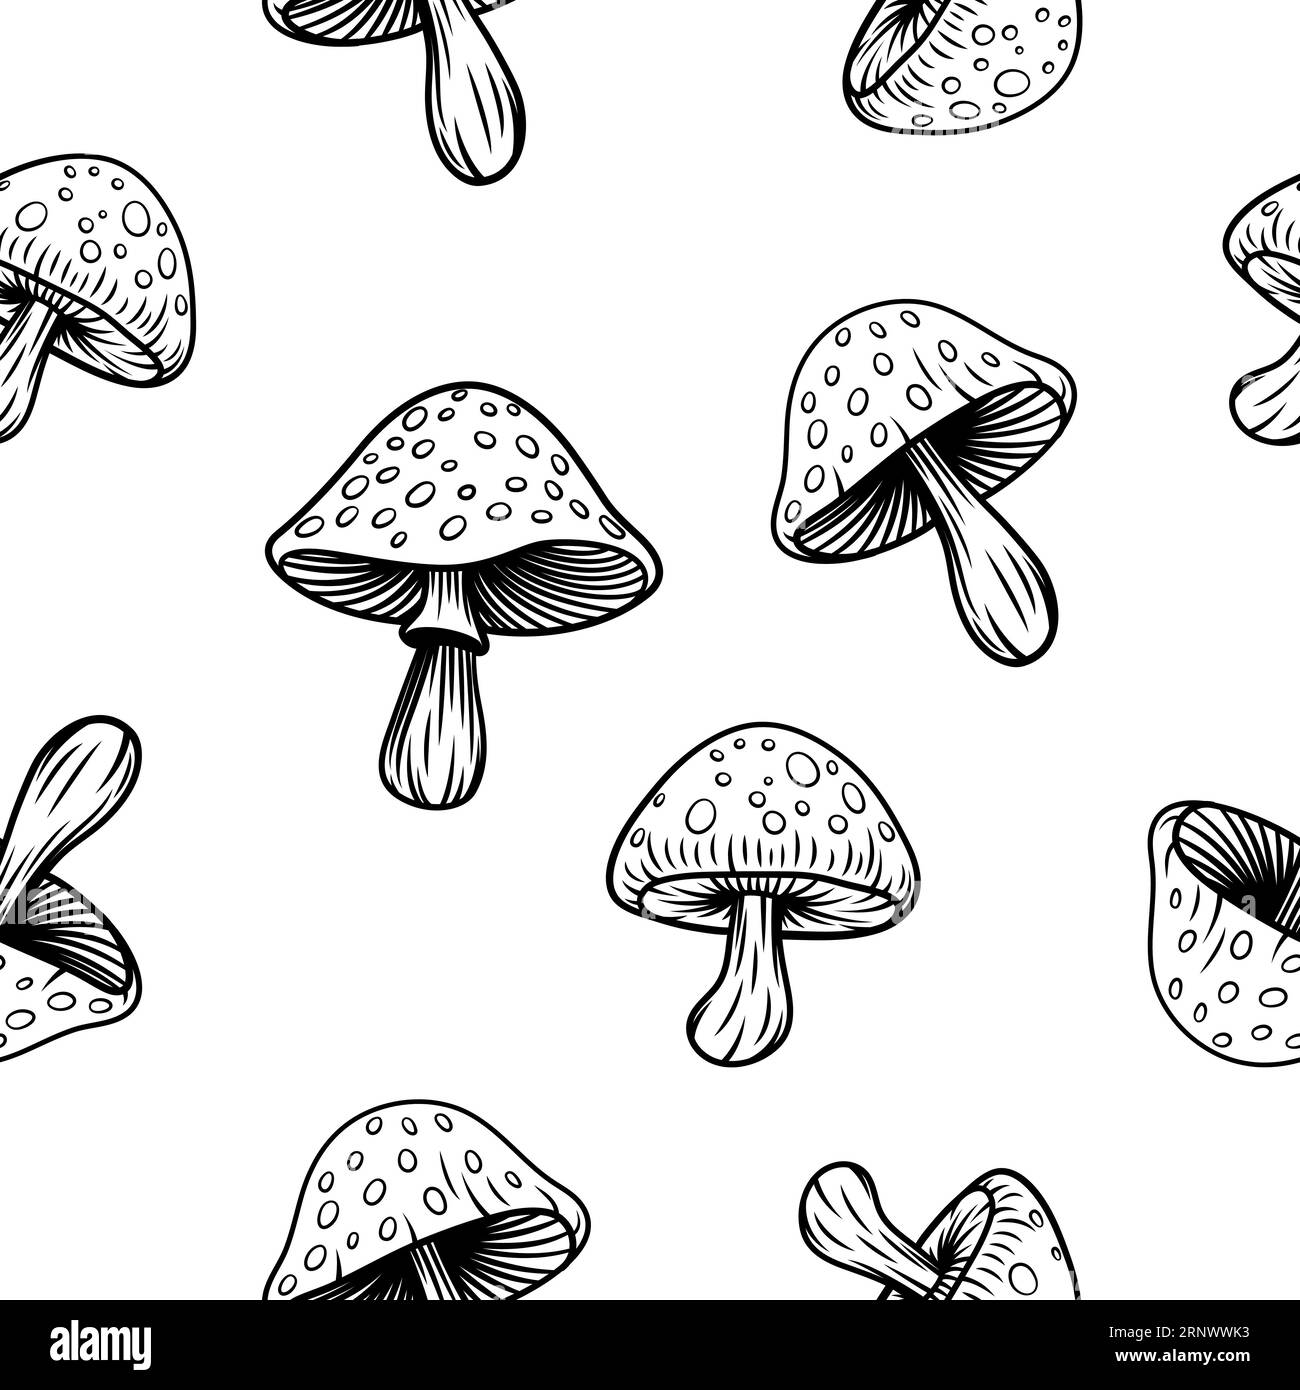 Vector Black and White Seamless Pattern with Hand Drawn Cartoon Mushrooms. Amanita Muscaria, Fly Agaric Illustration, Mushrooms Collection. Magic Stock Vector